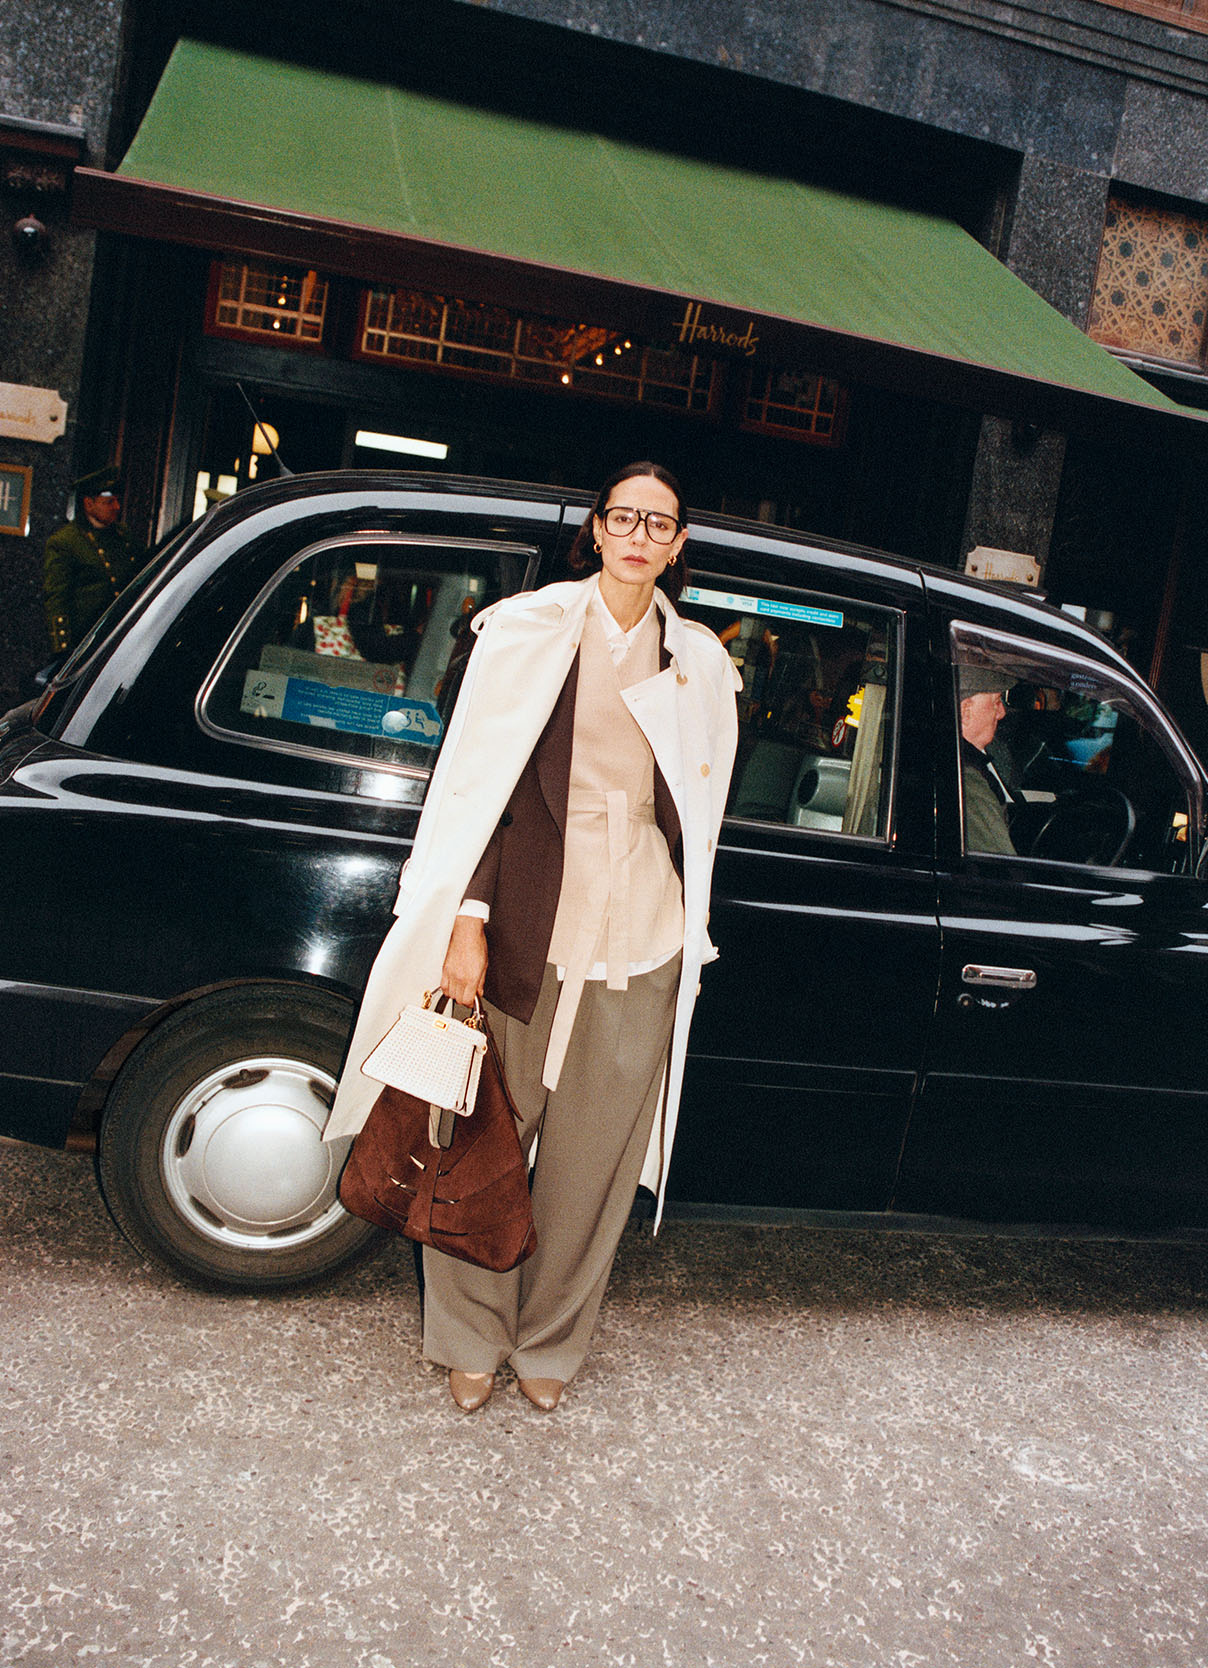 Woman exiting a taxi outside of the Harrods store wearing tailoring in shades of brown